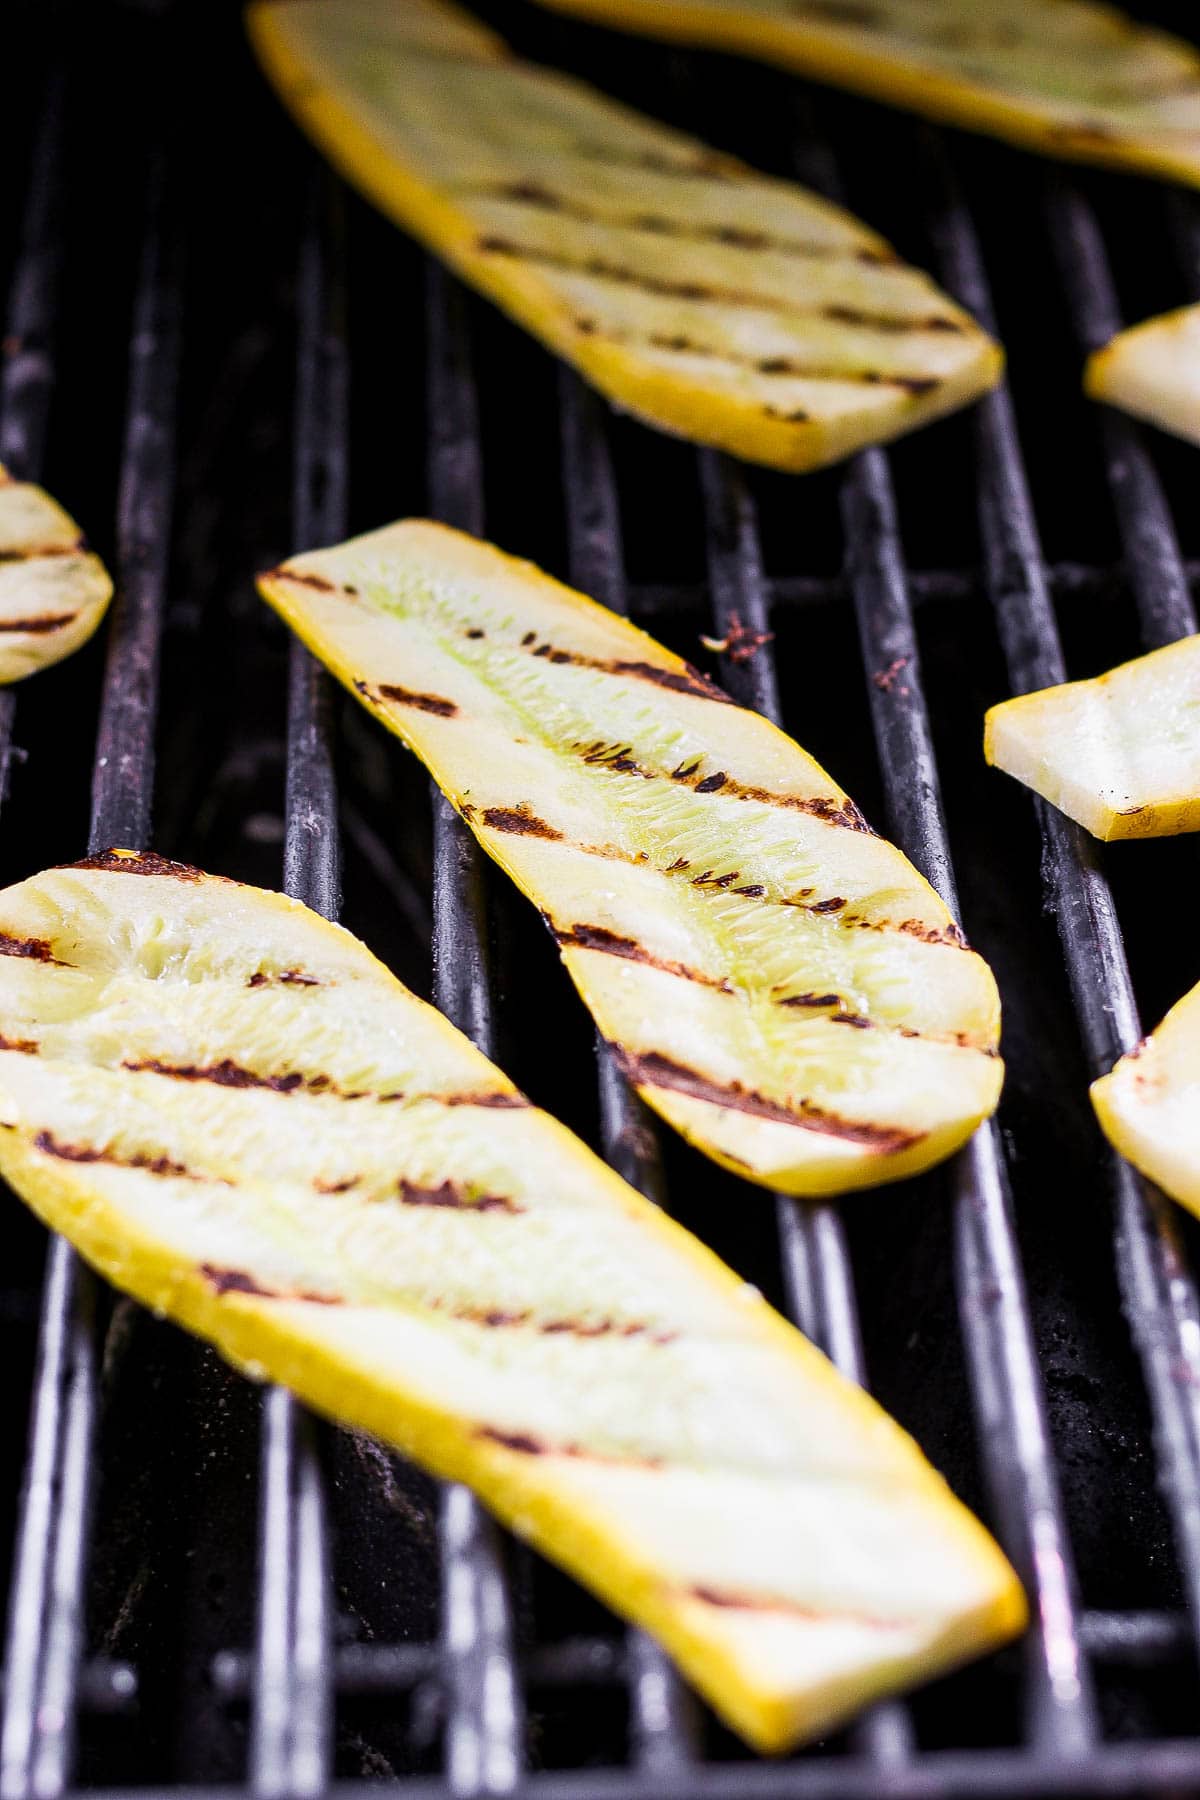 Slabs of yellow squash on the grill after being flipped.